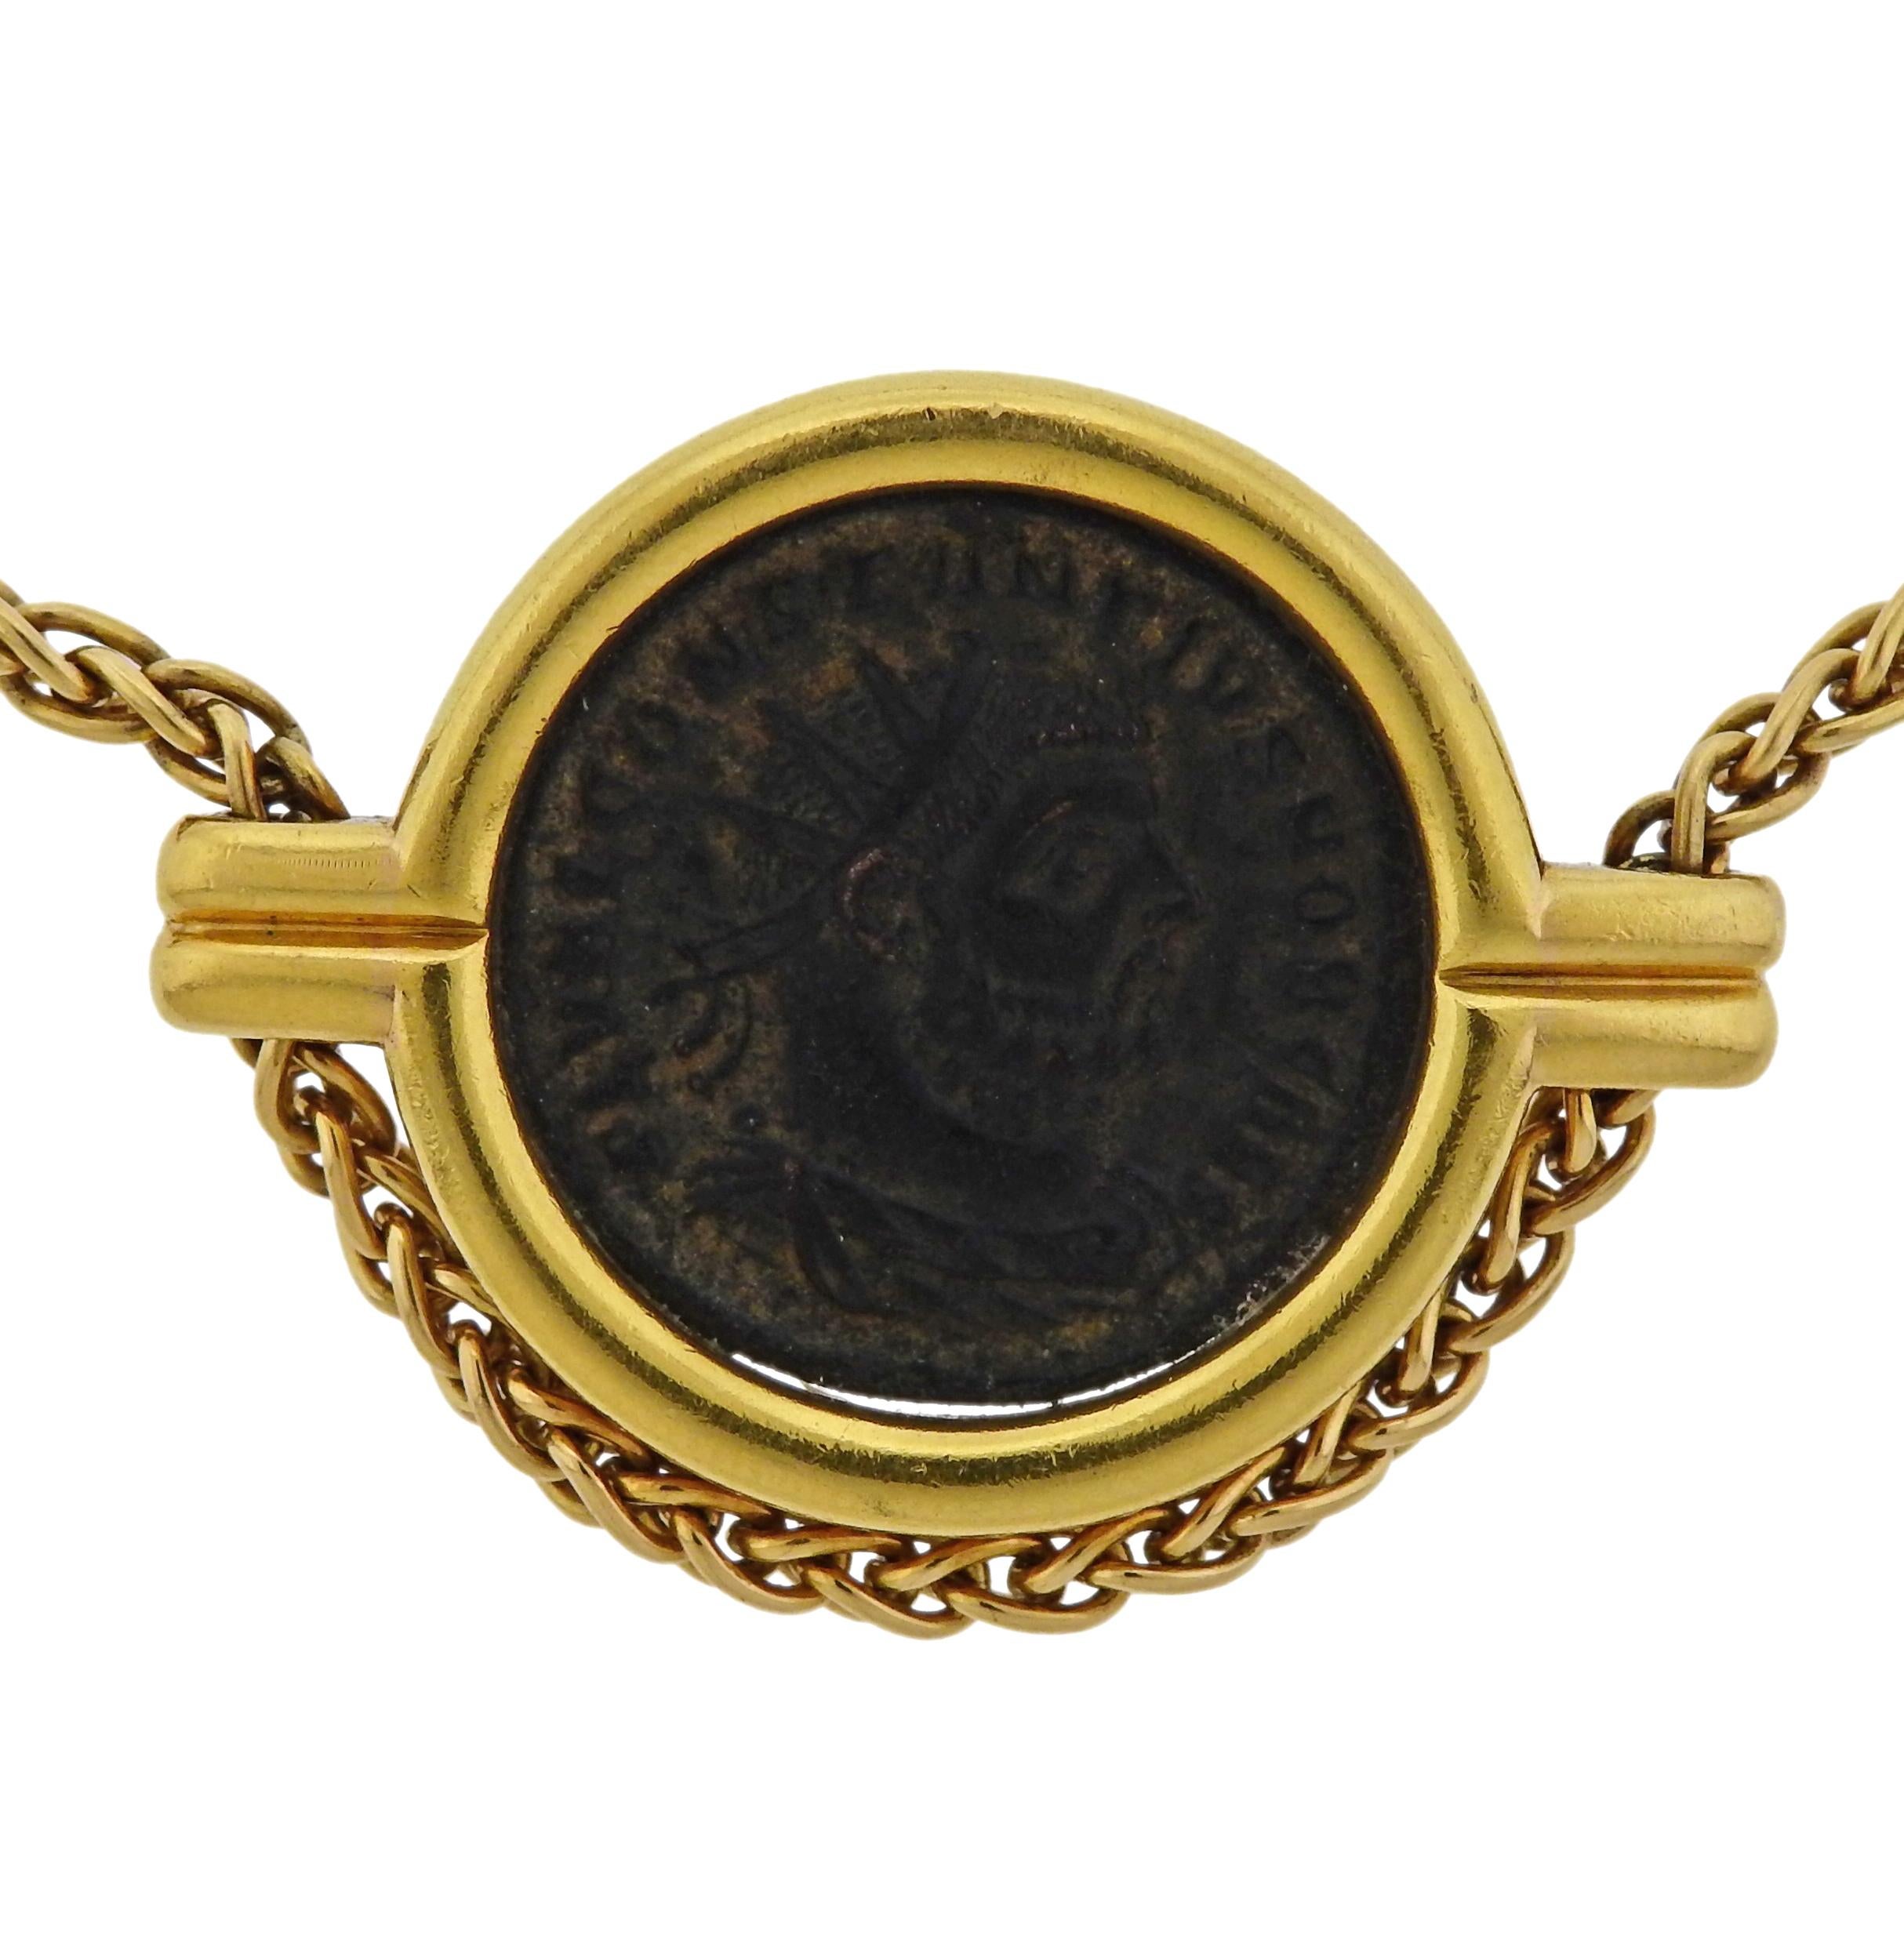 18k gold chain necklace, featuring Roma - Constantinus ancient coin, set in bezel pendant. Designed by Bvlgari.  Necklace is 18